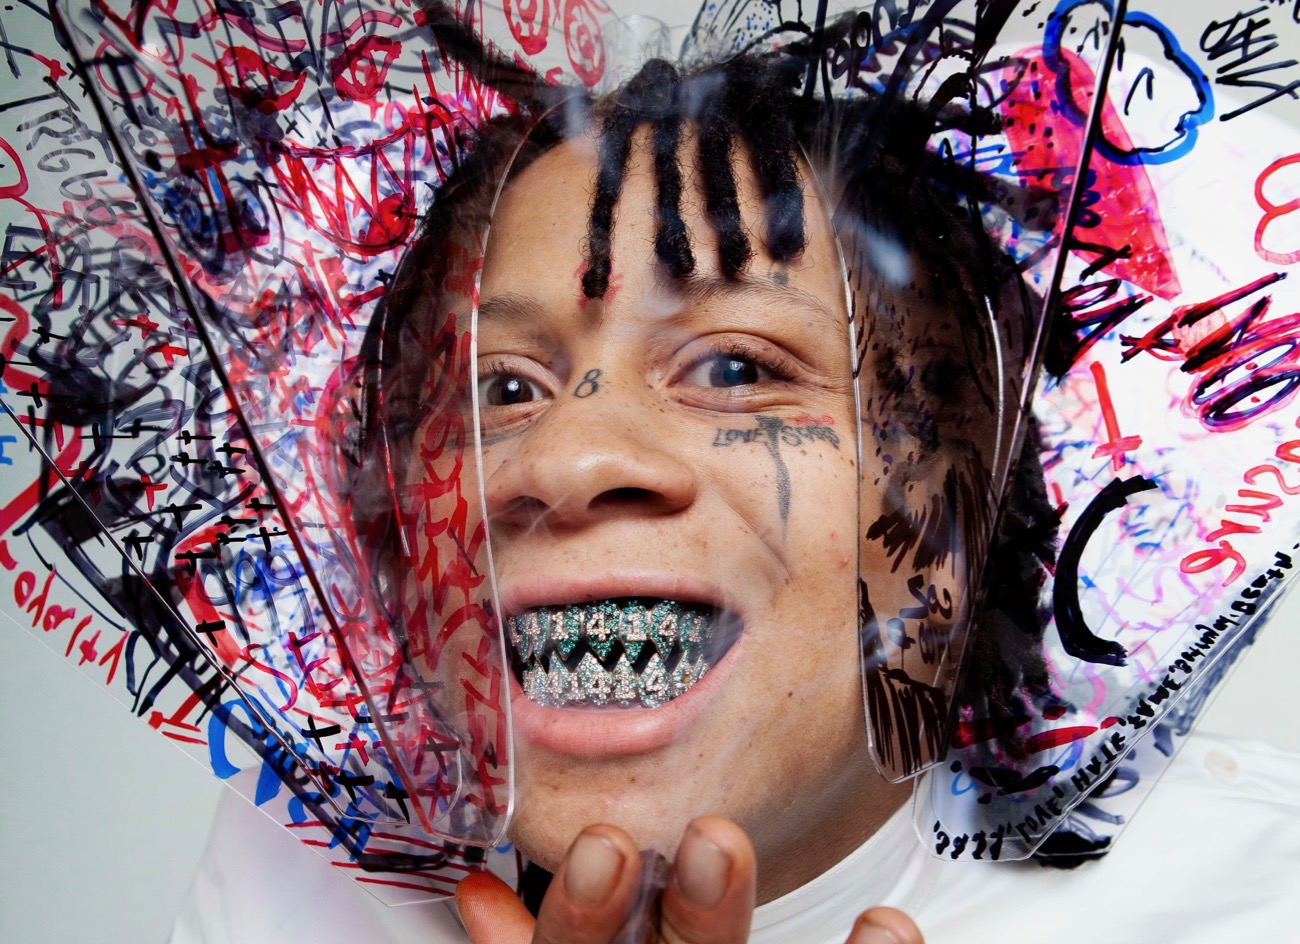 Trippie Redd Celebrates The Release Of His New Album In Hollywood Blurred Culture 3627